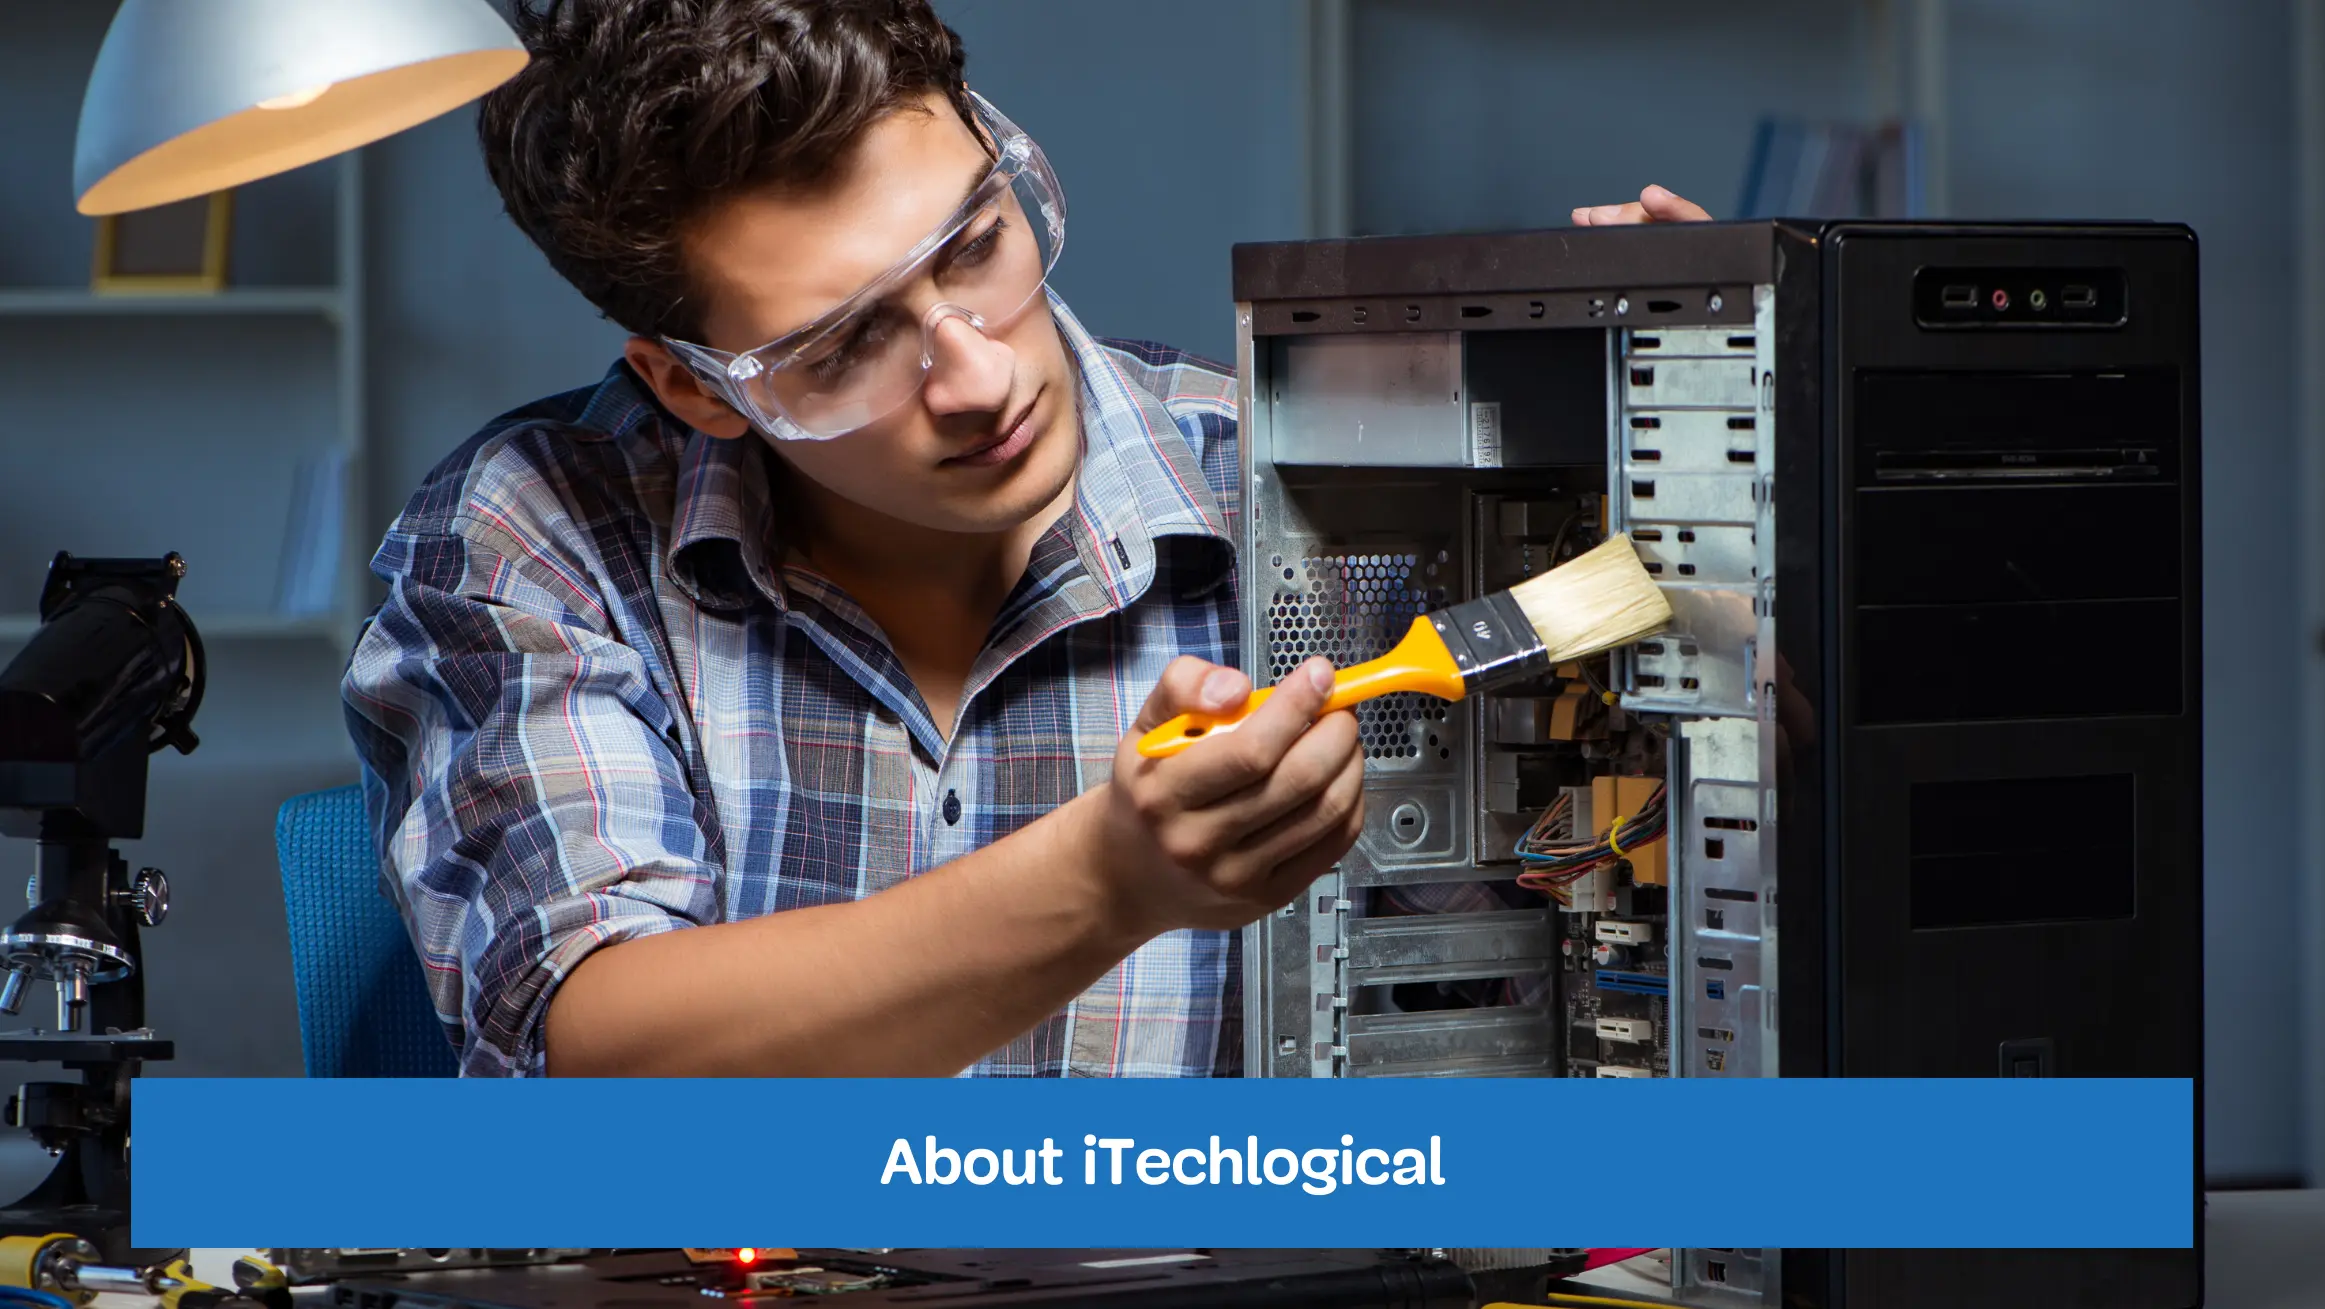 About iTechlogical - Learn More About Our Company